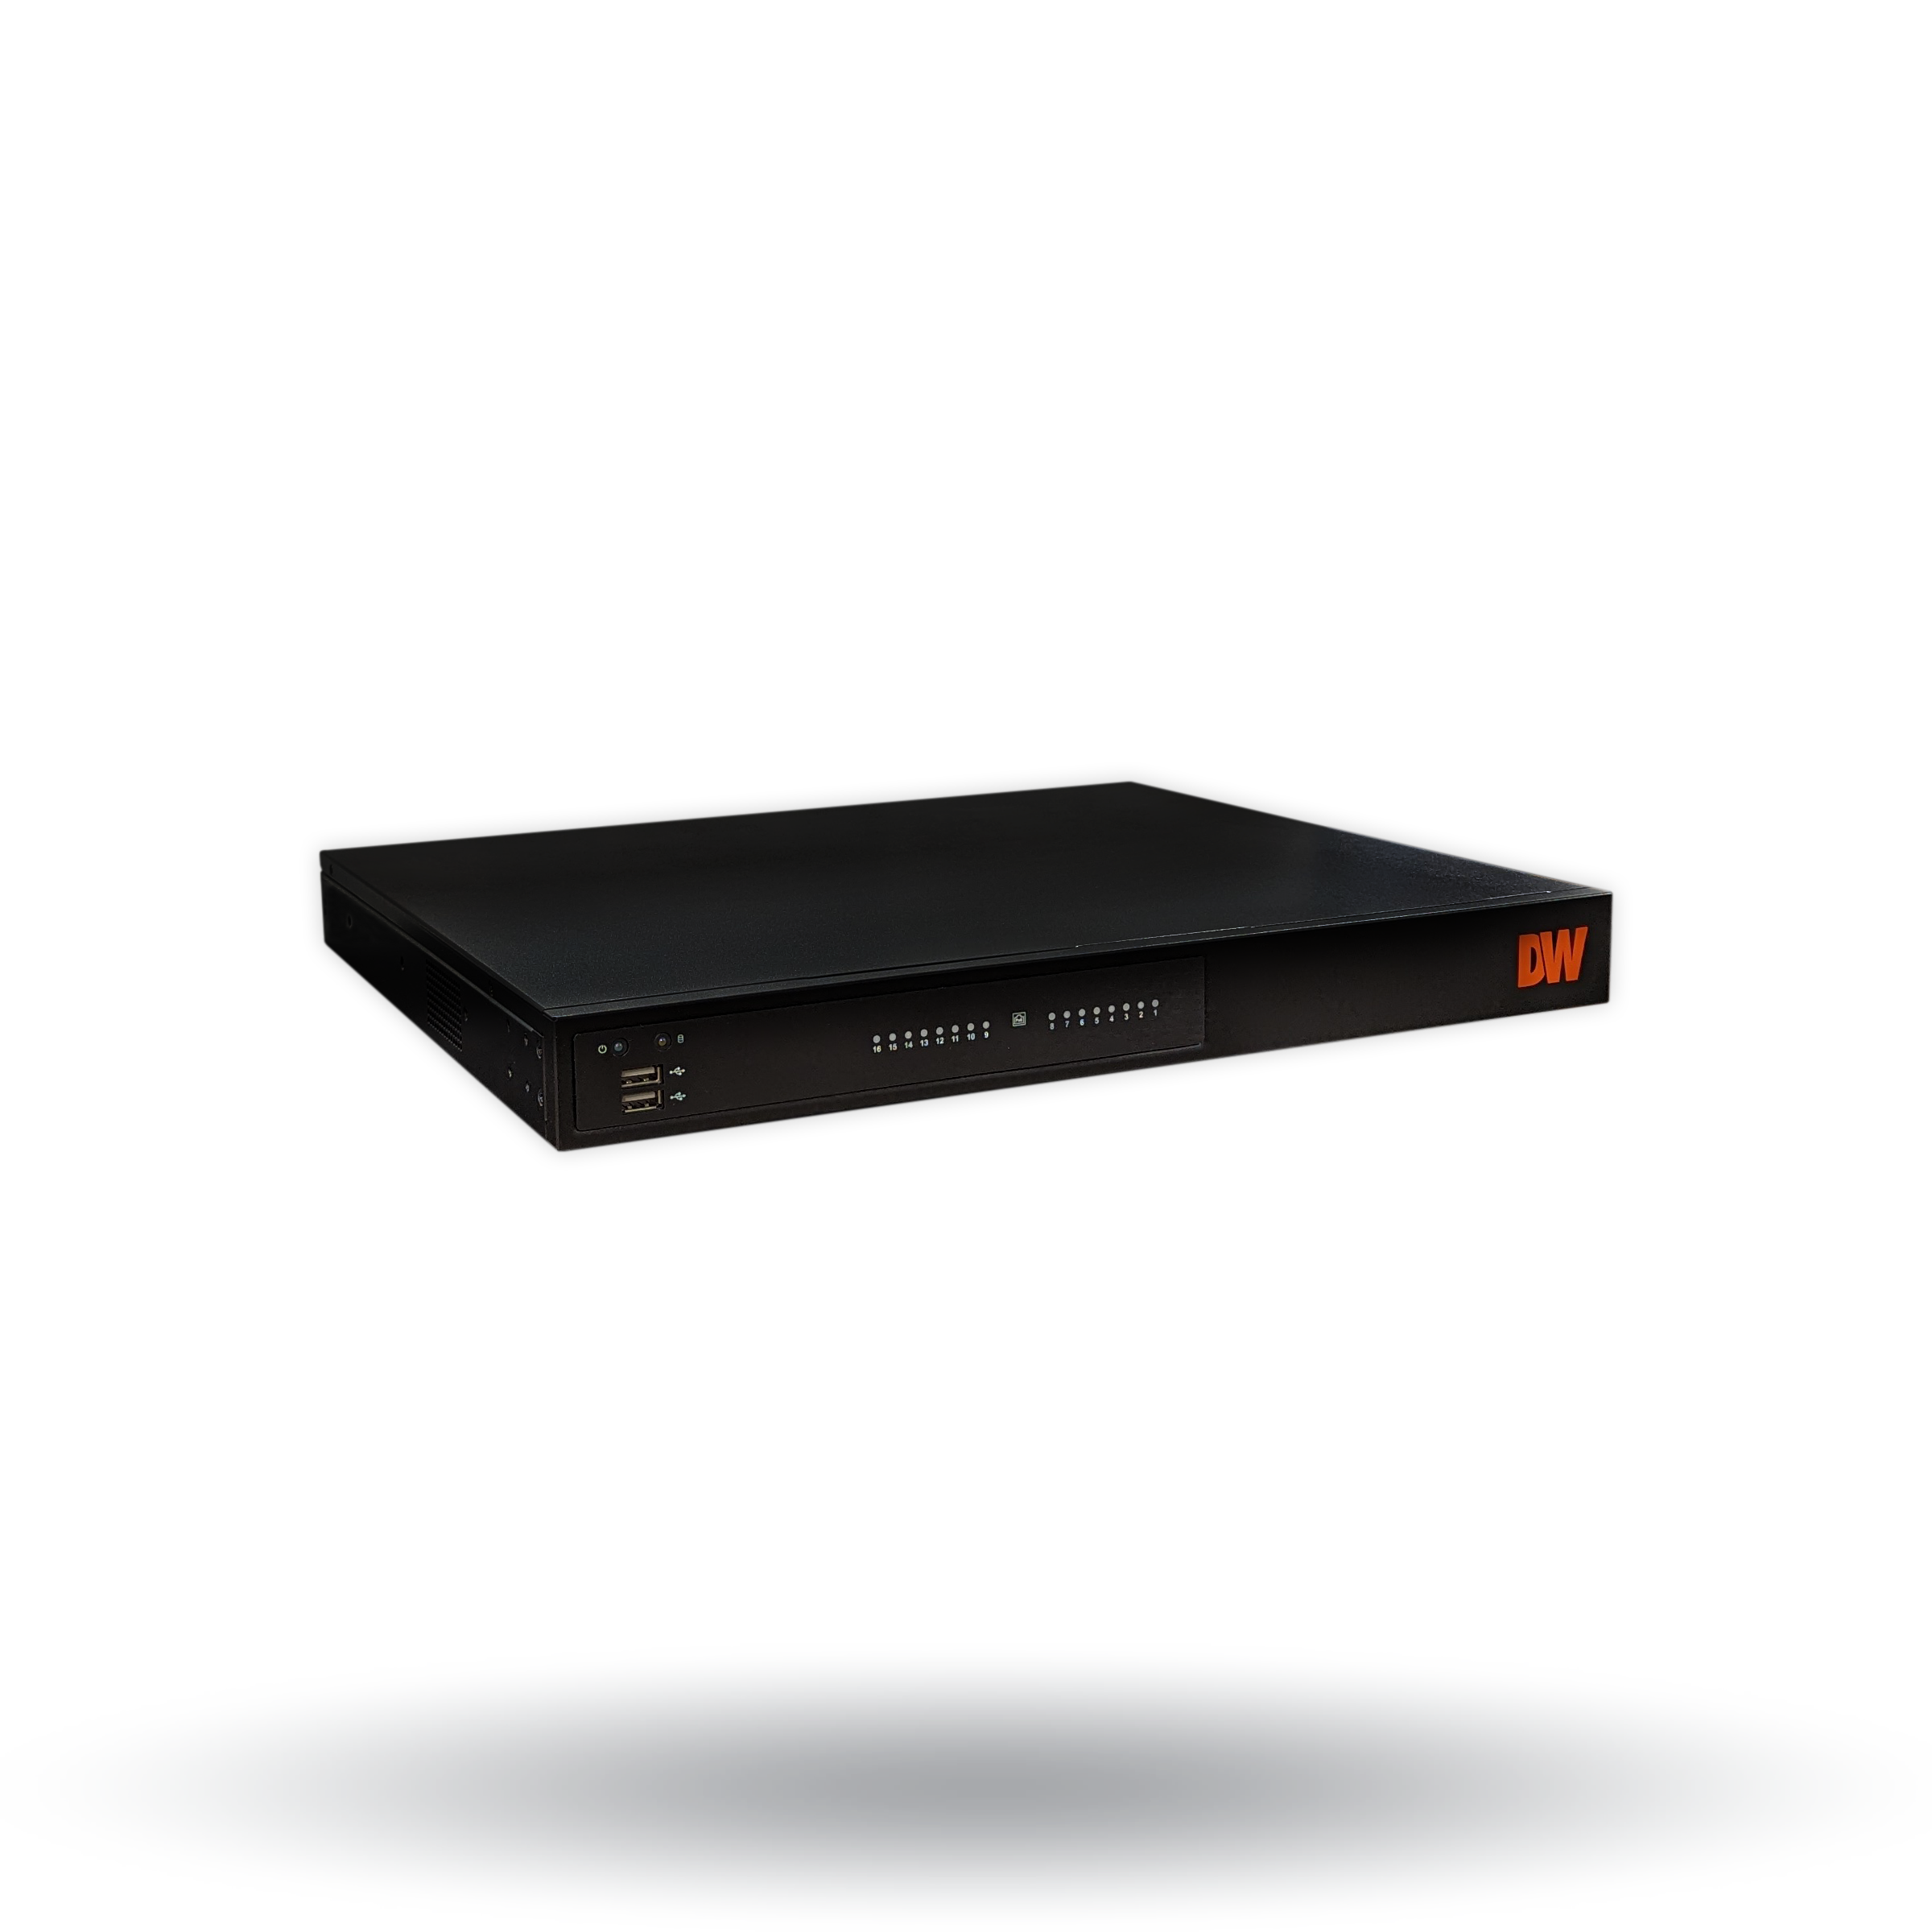 Blackjack CX 16-channel PoE NVR with 8 virtual channels